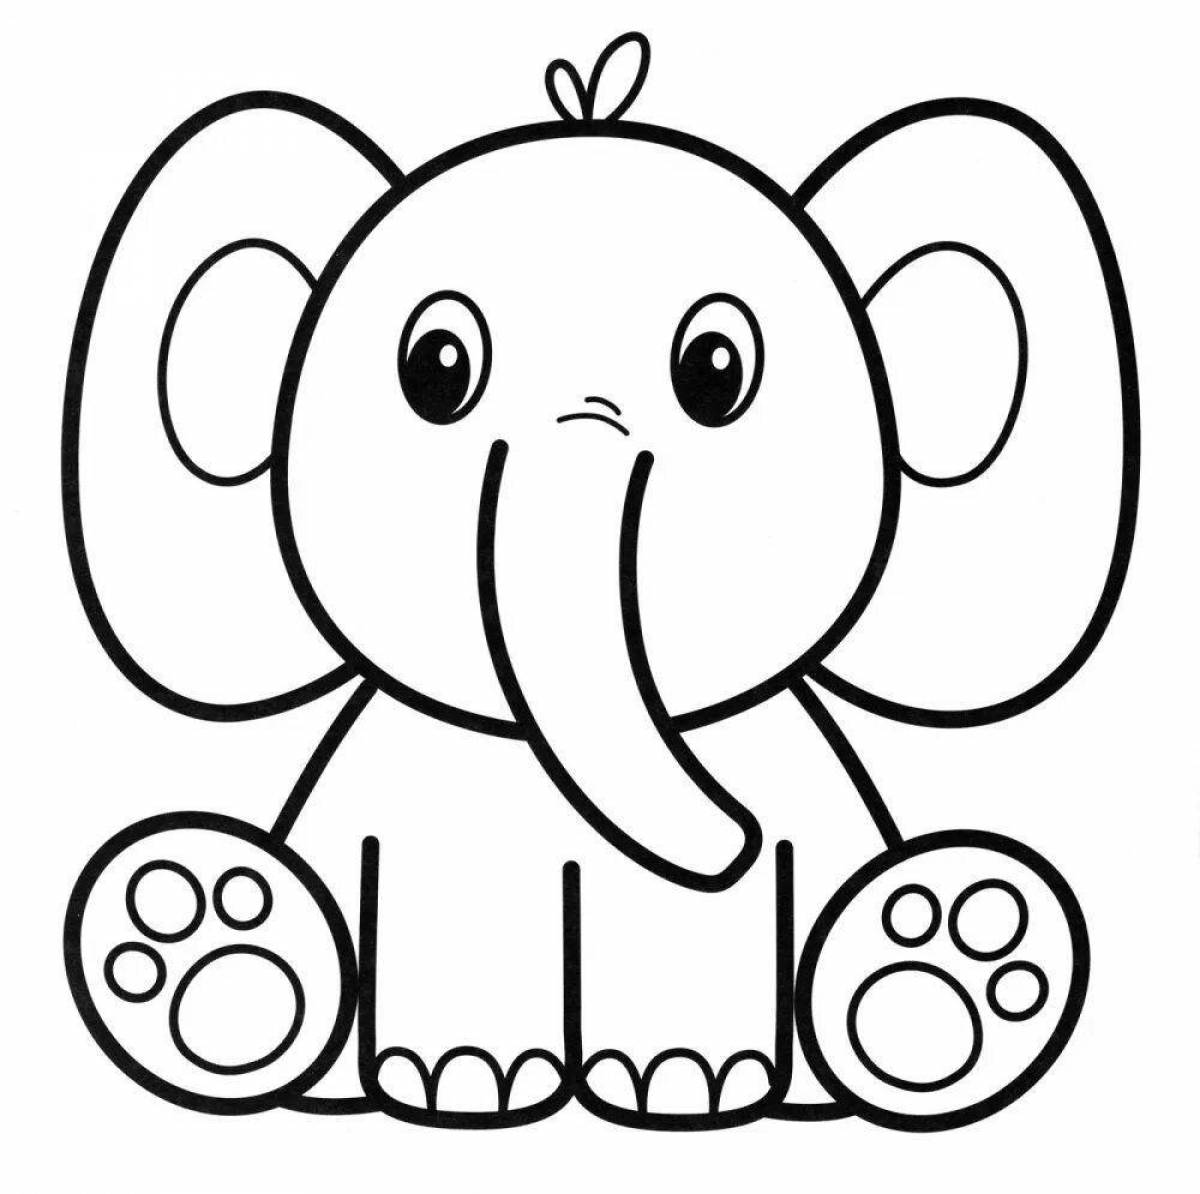 Coloring book irresistible elephant for children 3-4 years old